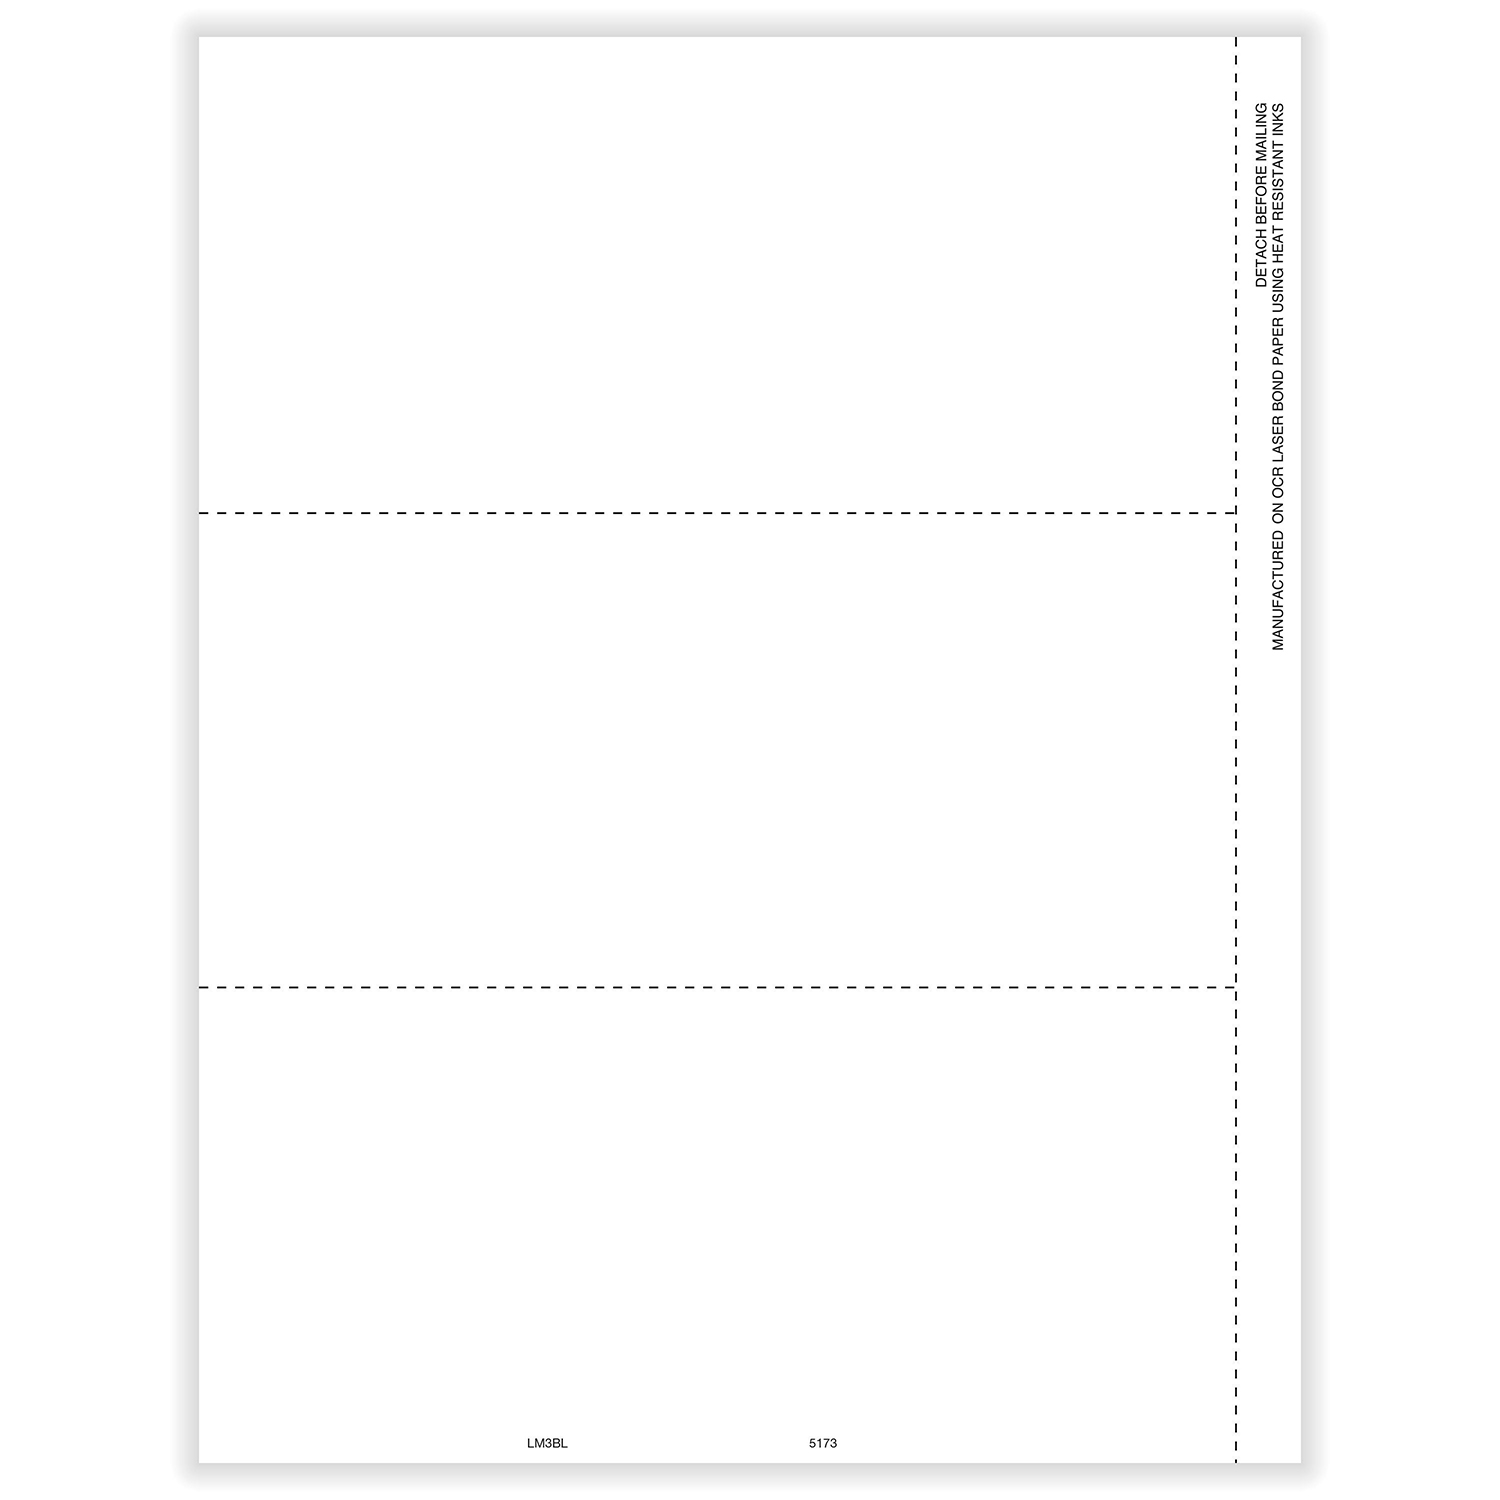 Picture of 1099-MISC Blank, Copy B & C, 3-Up, w/ Backer (500 Forms)